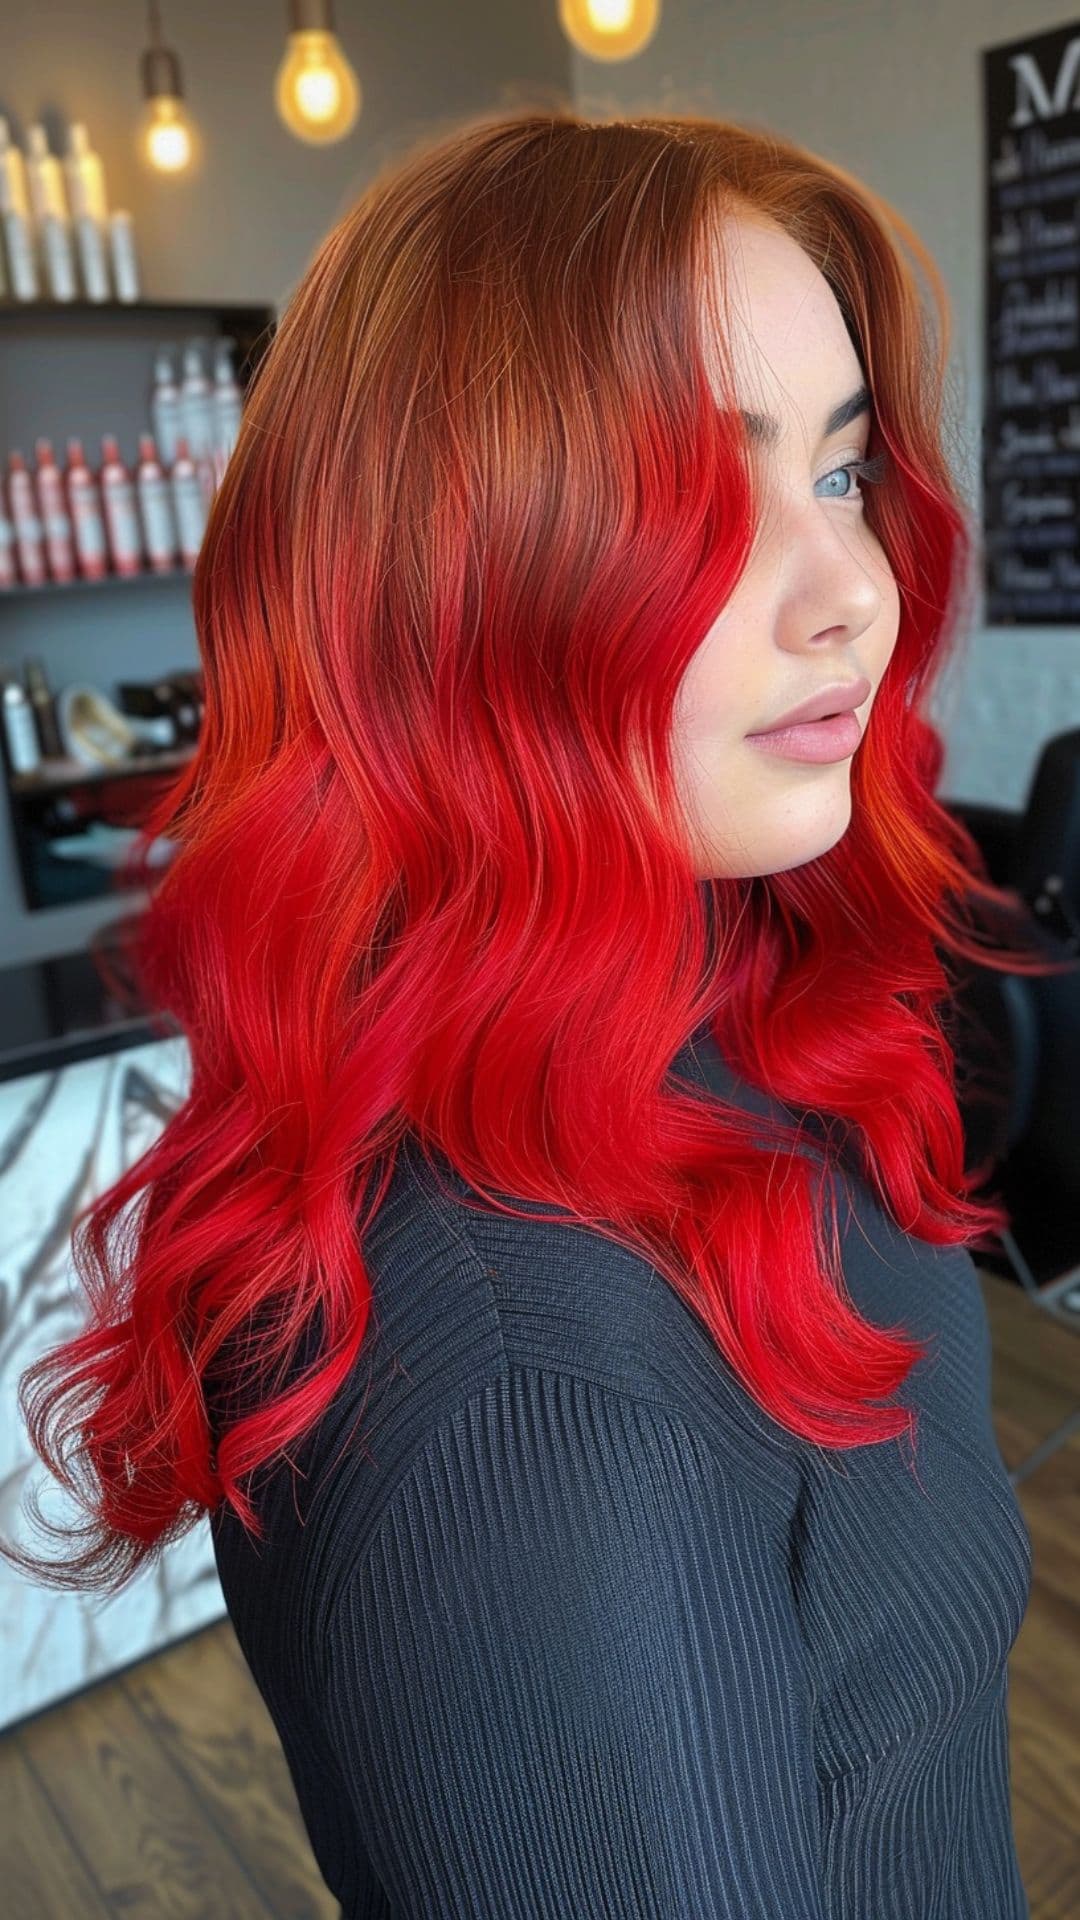 A woman modelling a fiery red hair.